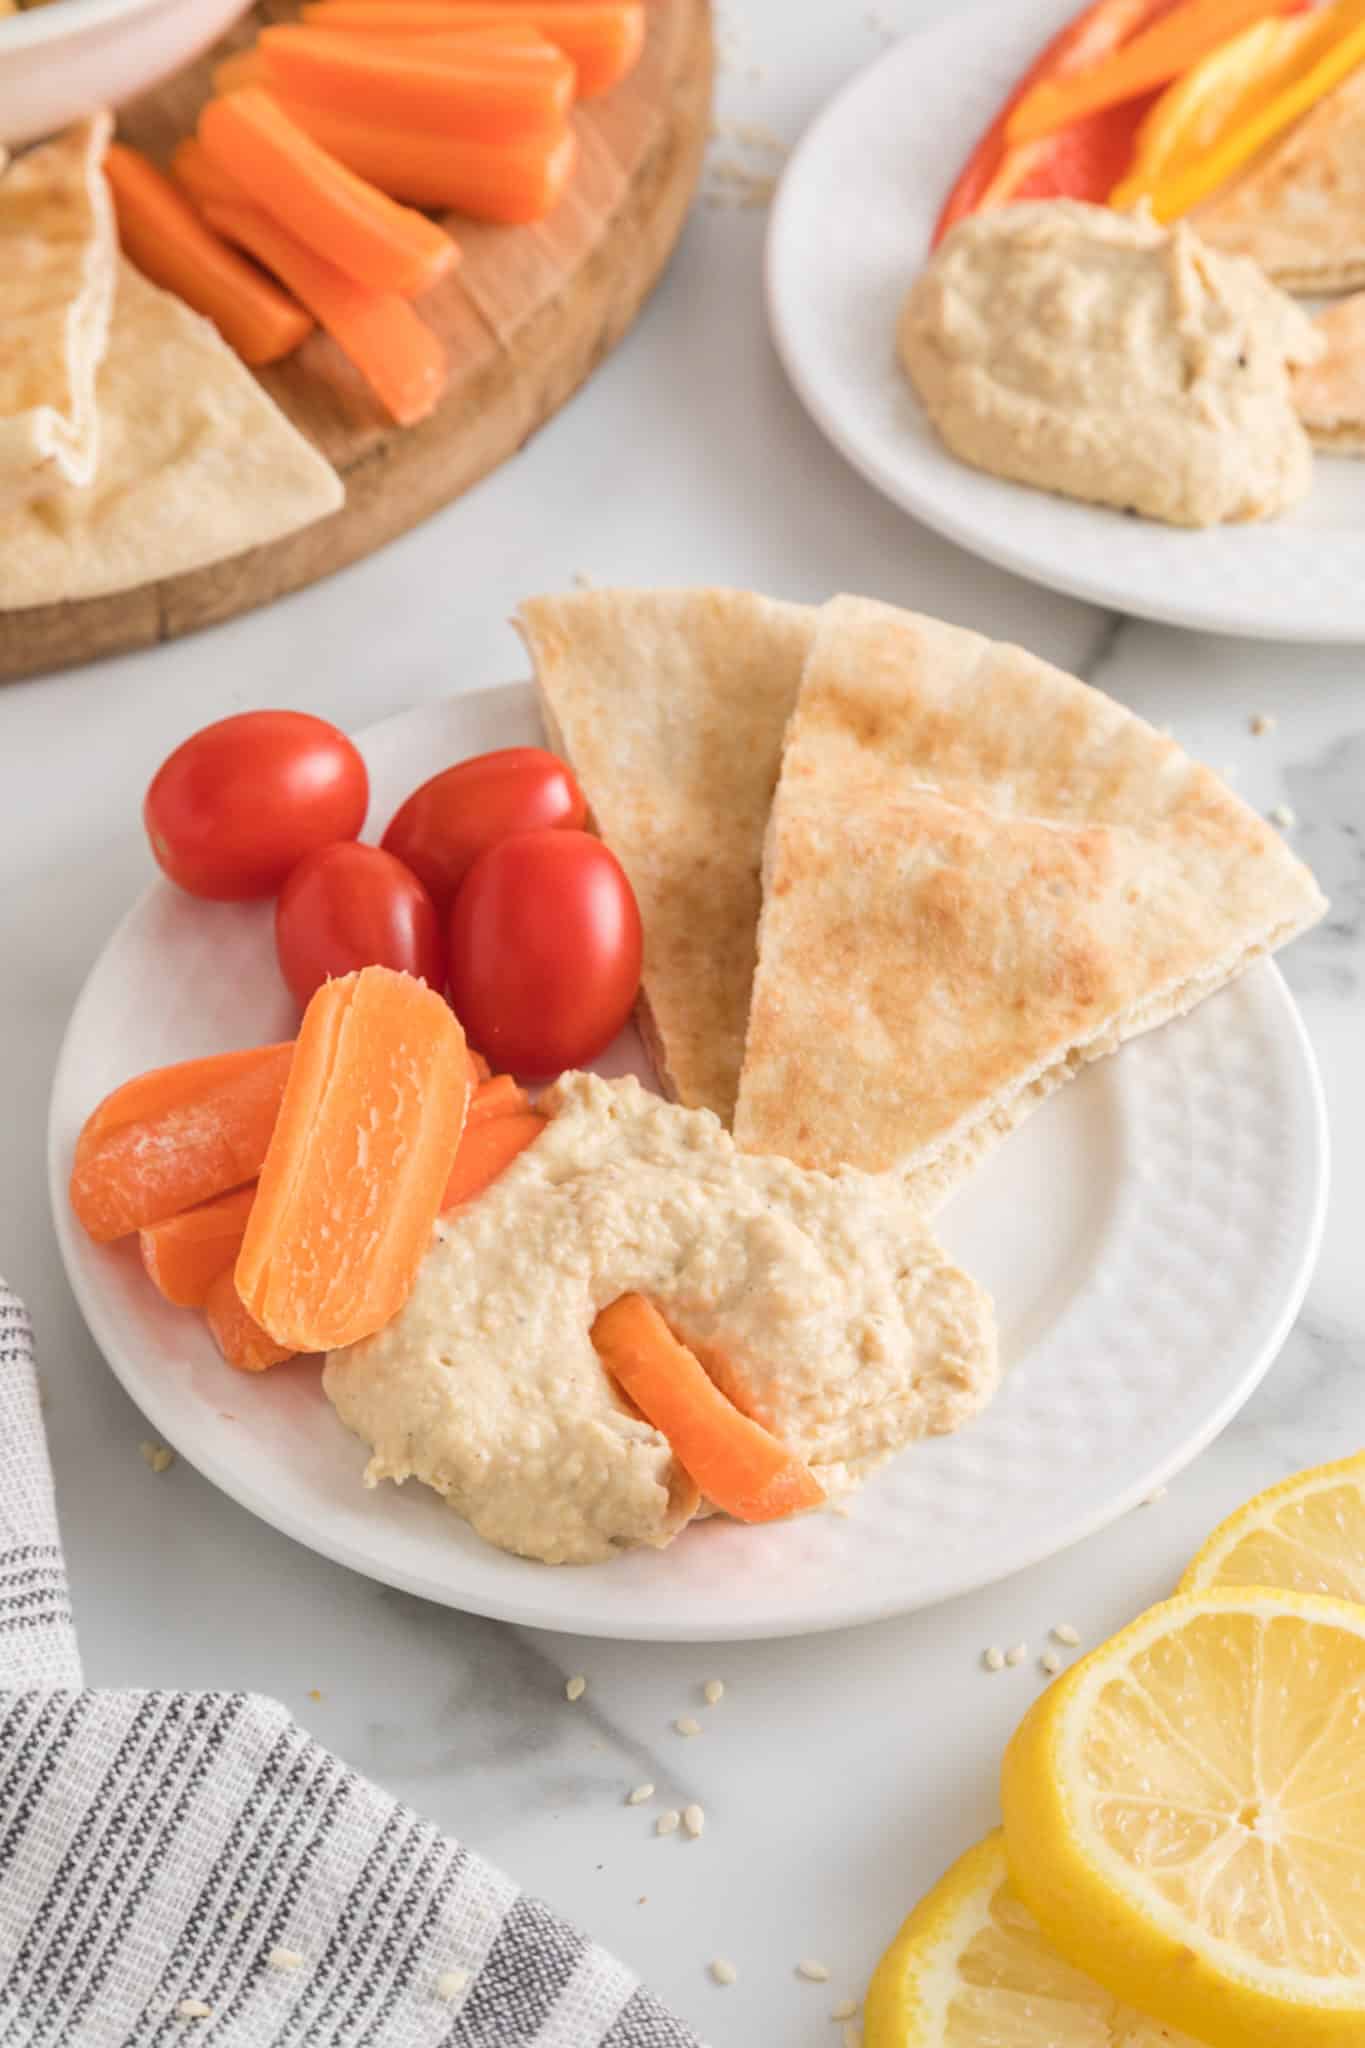 Oil free hummus with veggies and pita on a small white plate.